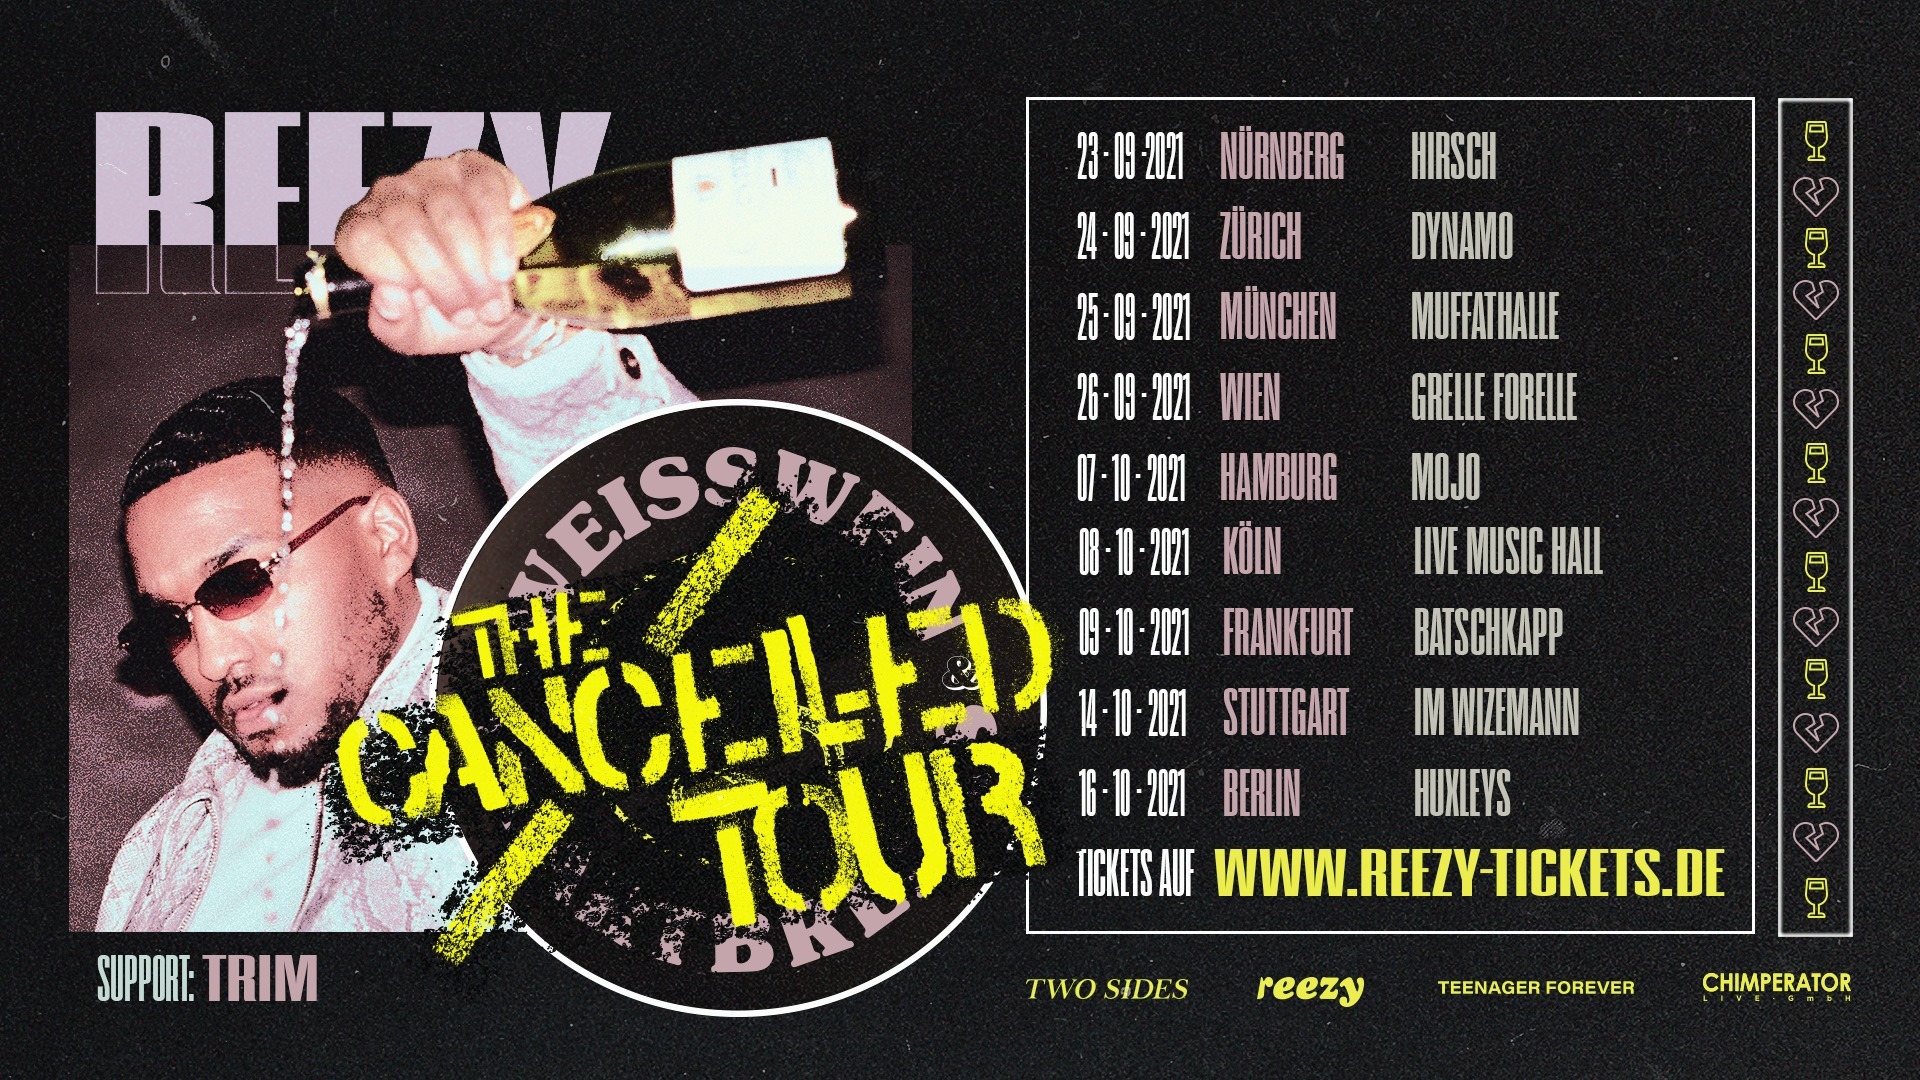 Reezy am 10. October 2020 @ Grelle Forelle.